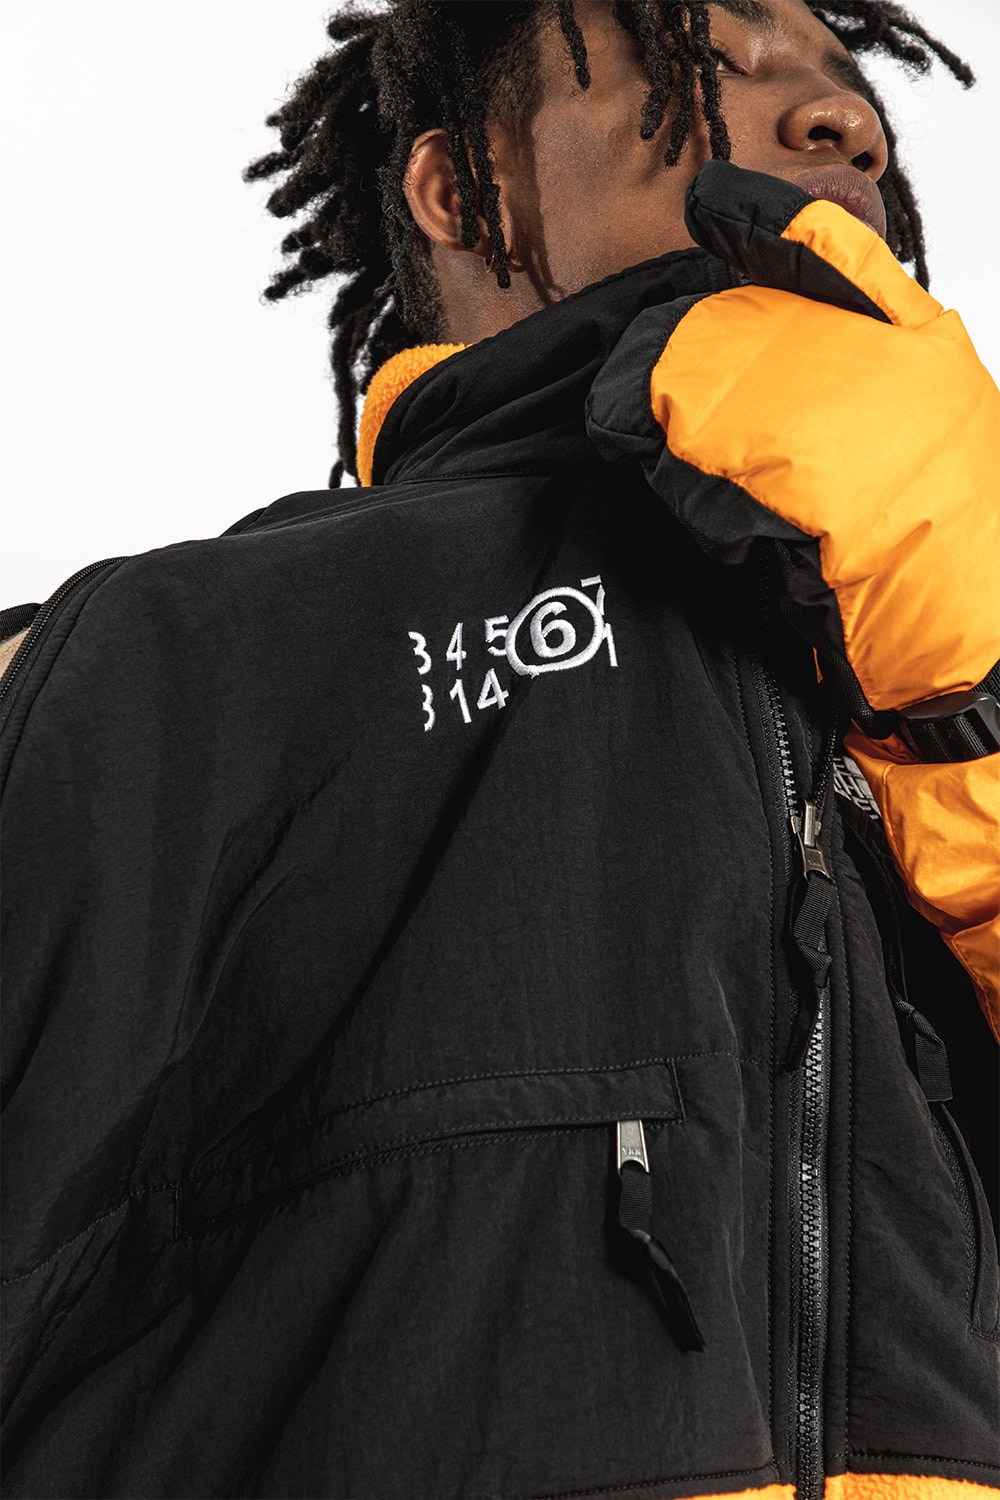 MM6 Maison Margiela x The North Face FW20 Collection Hypebeast Closer Look fashion MMM Margiela Outerwear Jackets 